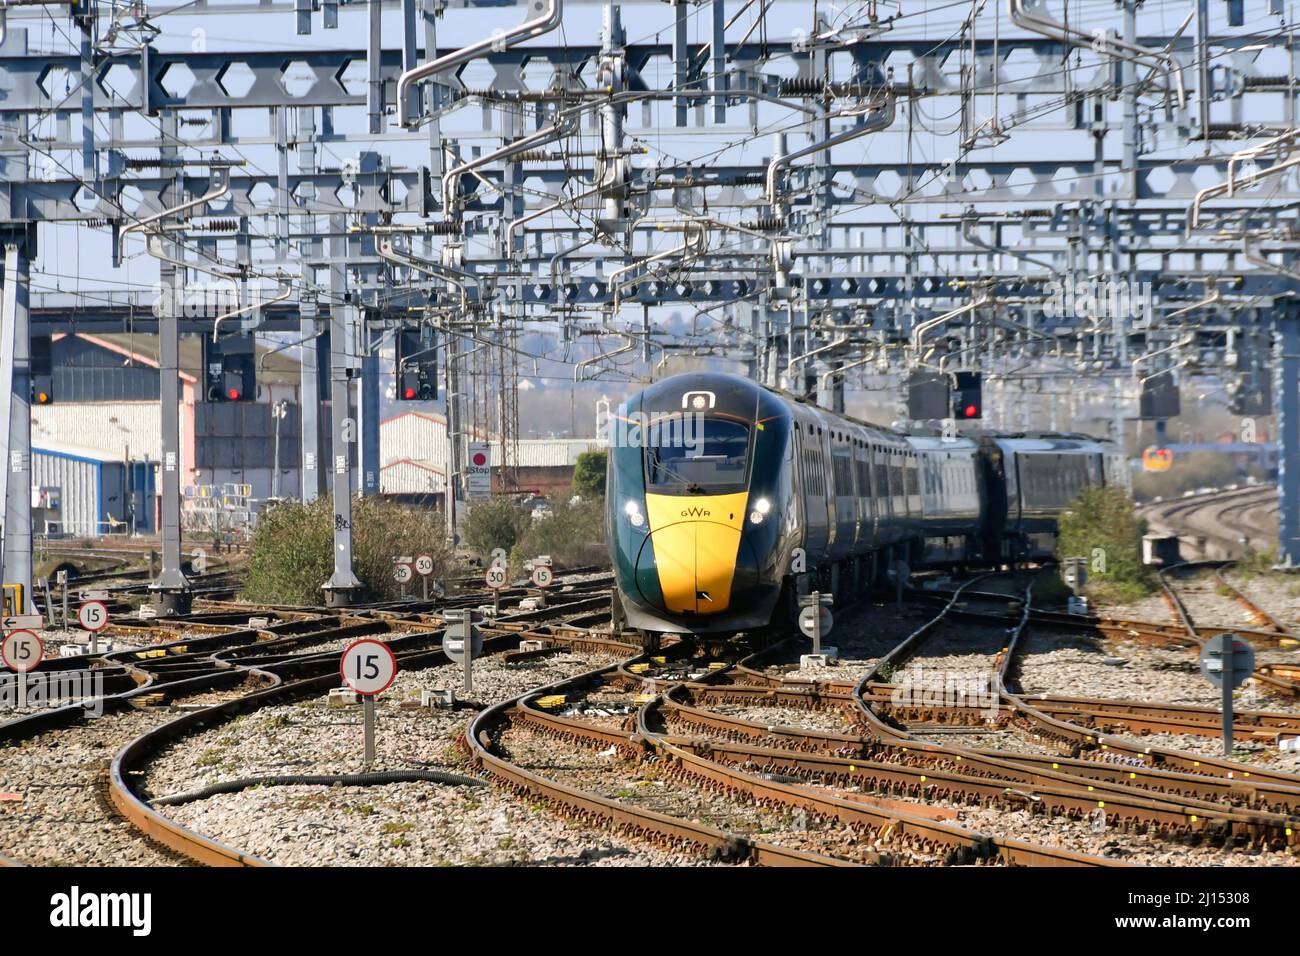 Cardiff, Wales - March 2022: Class 800 high speed train operated by Great Western railway approaching Cardiff Central railway station under wires Stock Photo